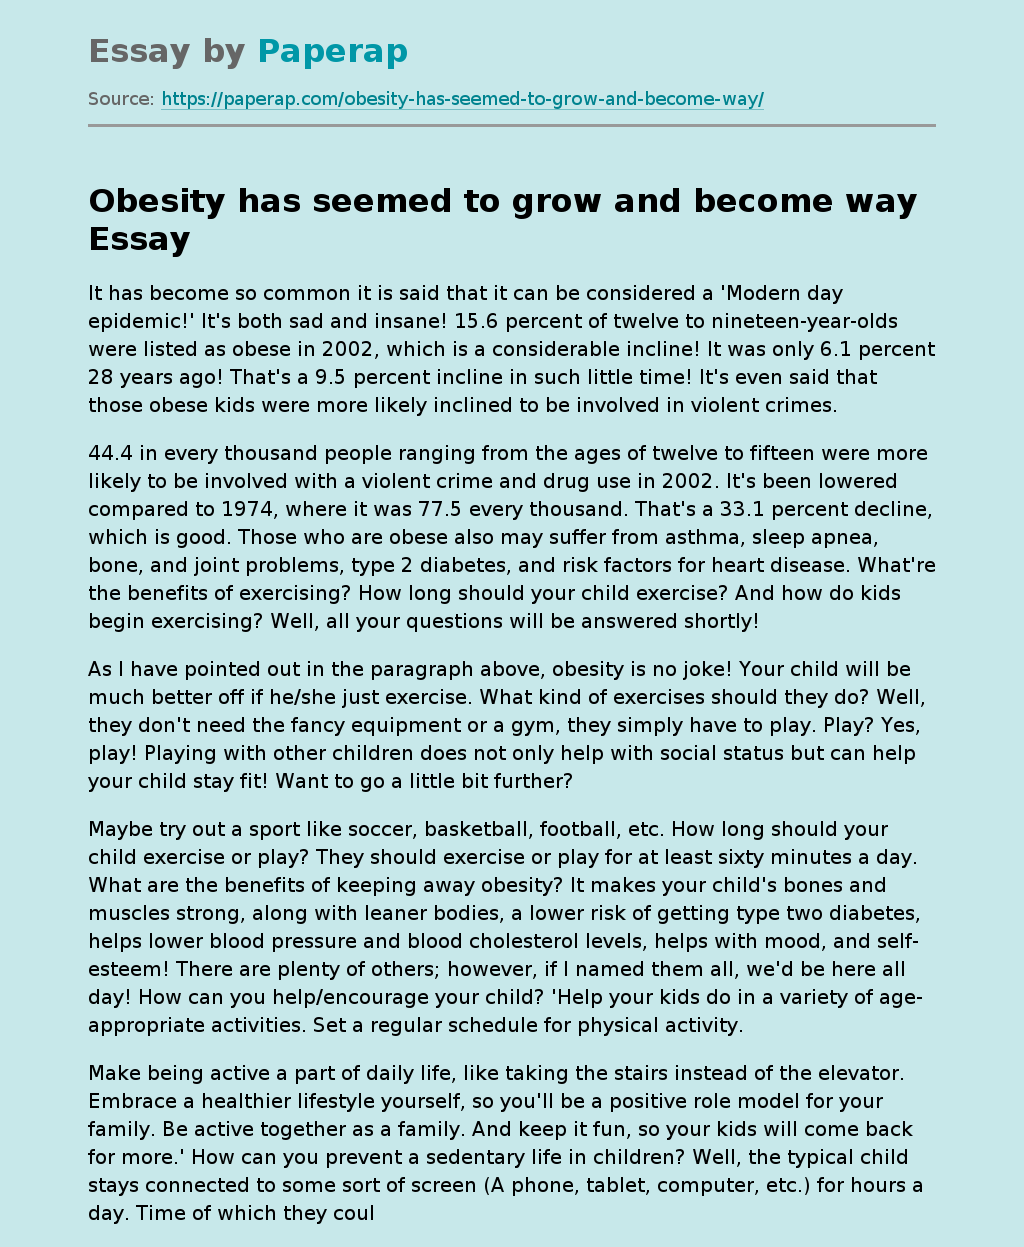 Obesity has seemed to grow and become way